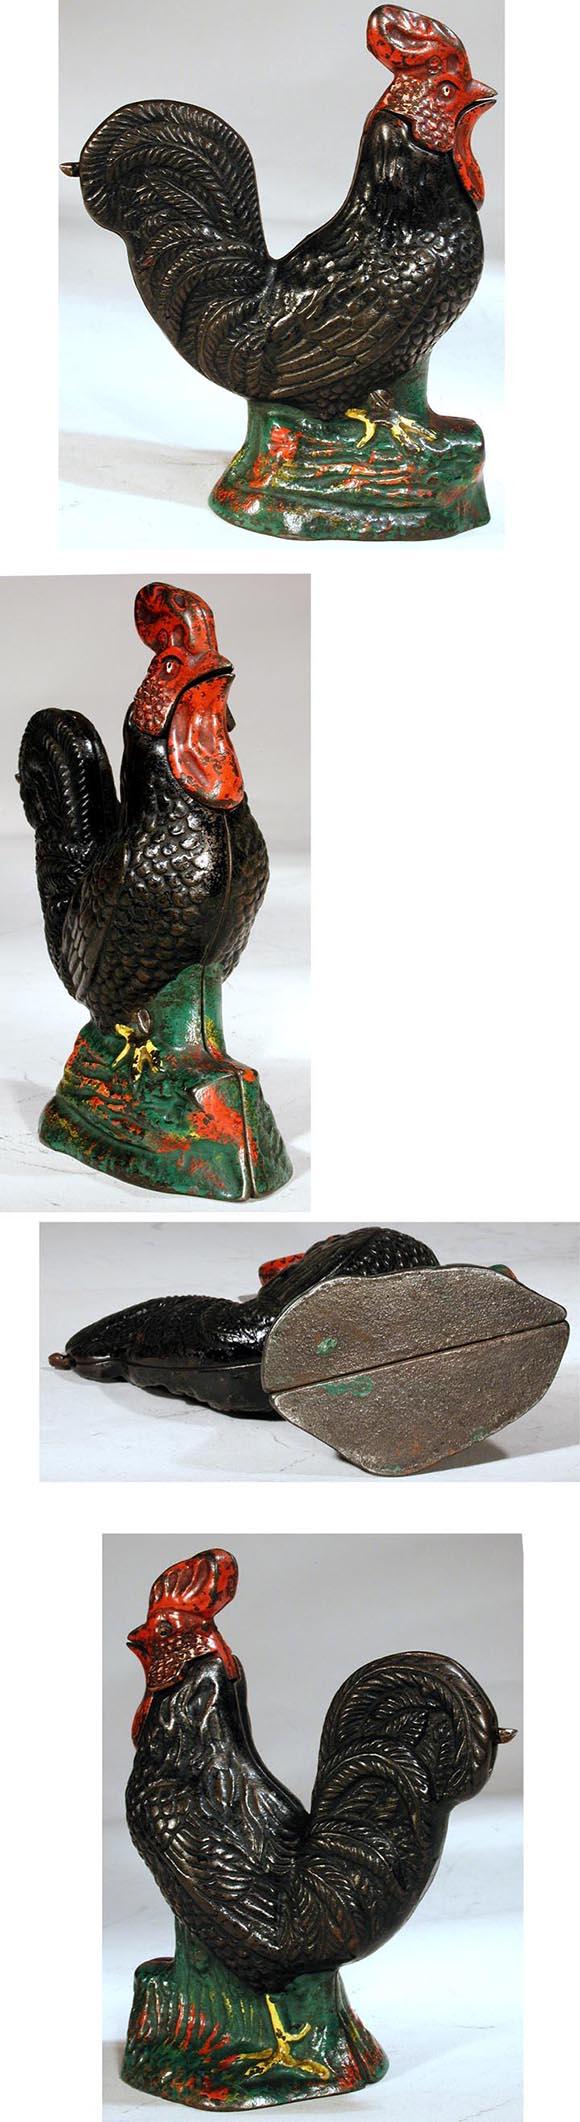 c.1880 Kyser and Rex Co., Cast Iron Mechanical Rooster Bank